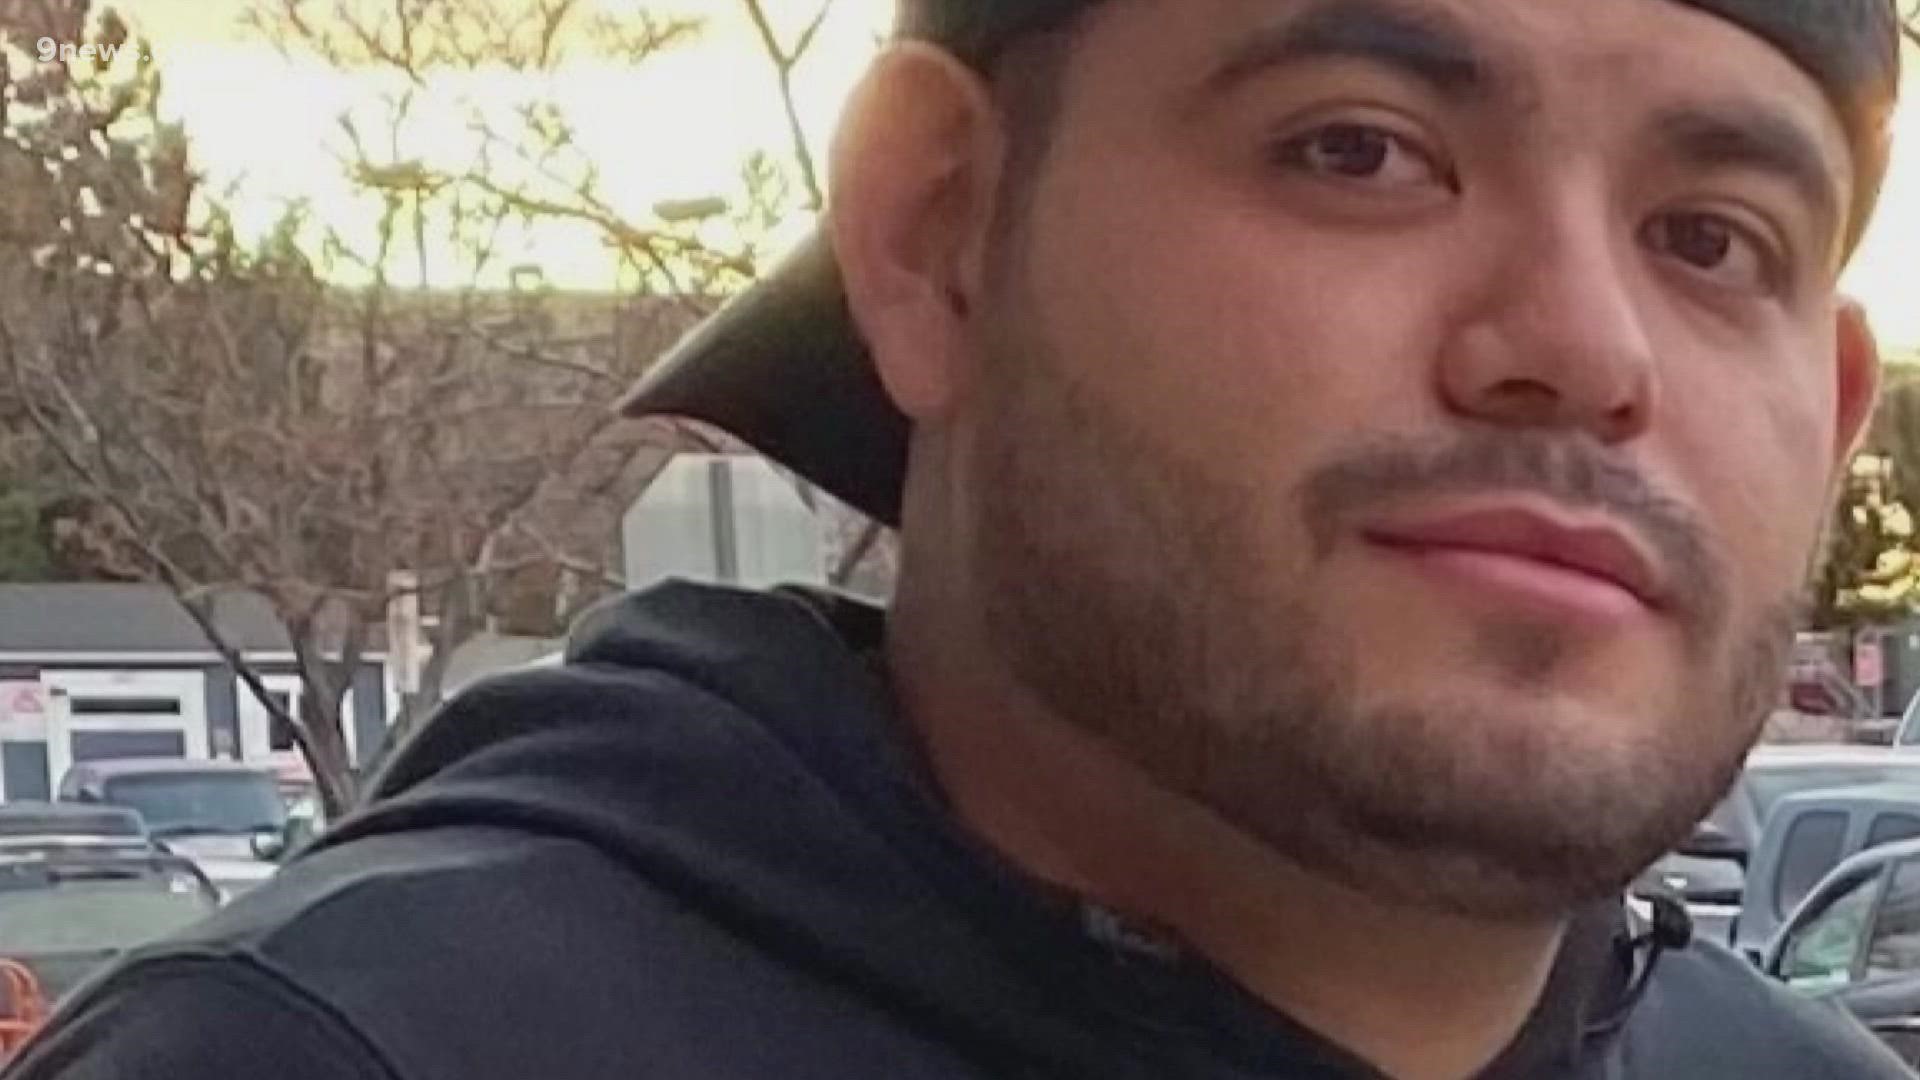 Cesar Carrillo was hit and killed riding his motorcycle Aug. 6. The driver who hit him didn't stay on the scene, and police are looking for the person responsible.